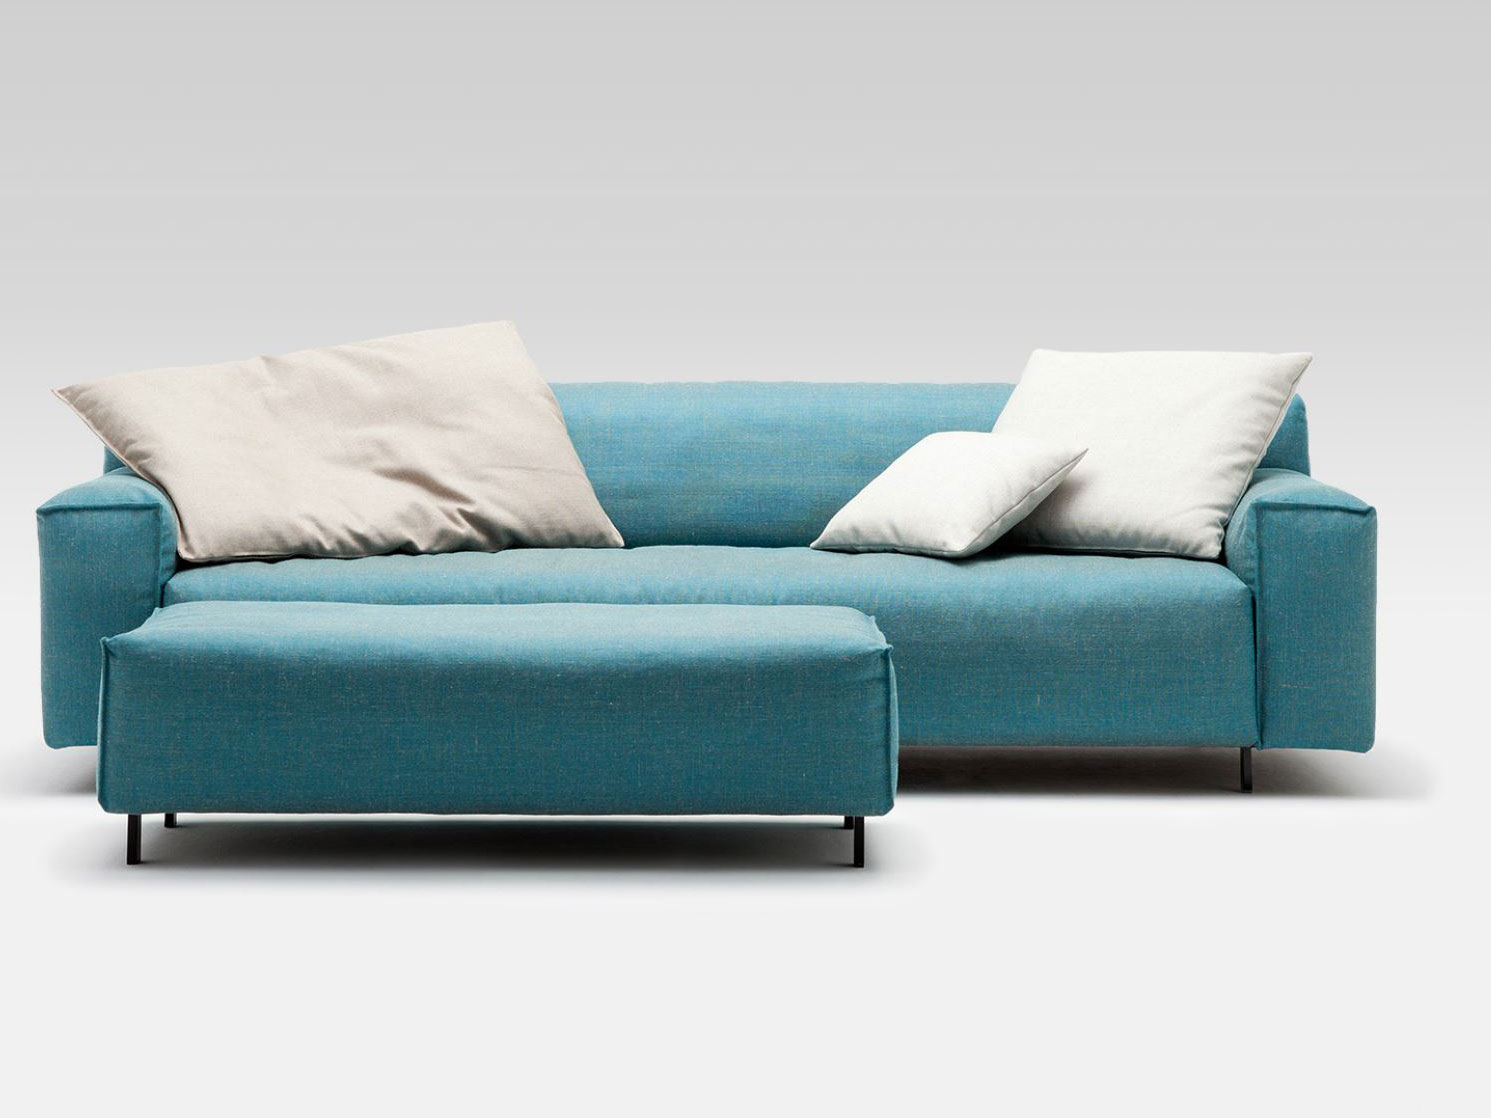 Rolf Benz Blue Comfortable Rolf Benz Sofa In Blue With White Cushions In Modern Minimalist Shaped Design For Living Room Furniture Inspiration Furniture  Rolf Benz Sofa Firms Innovation 